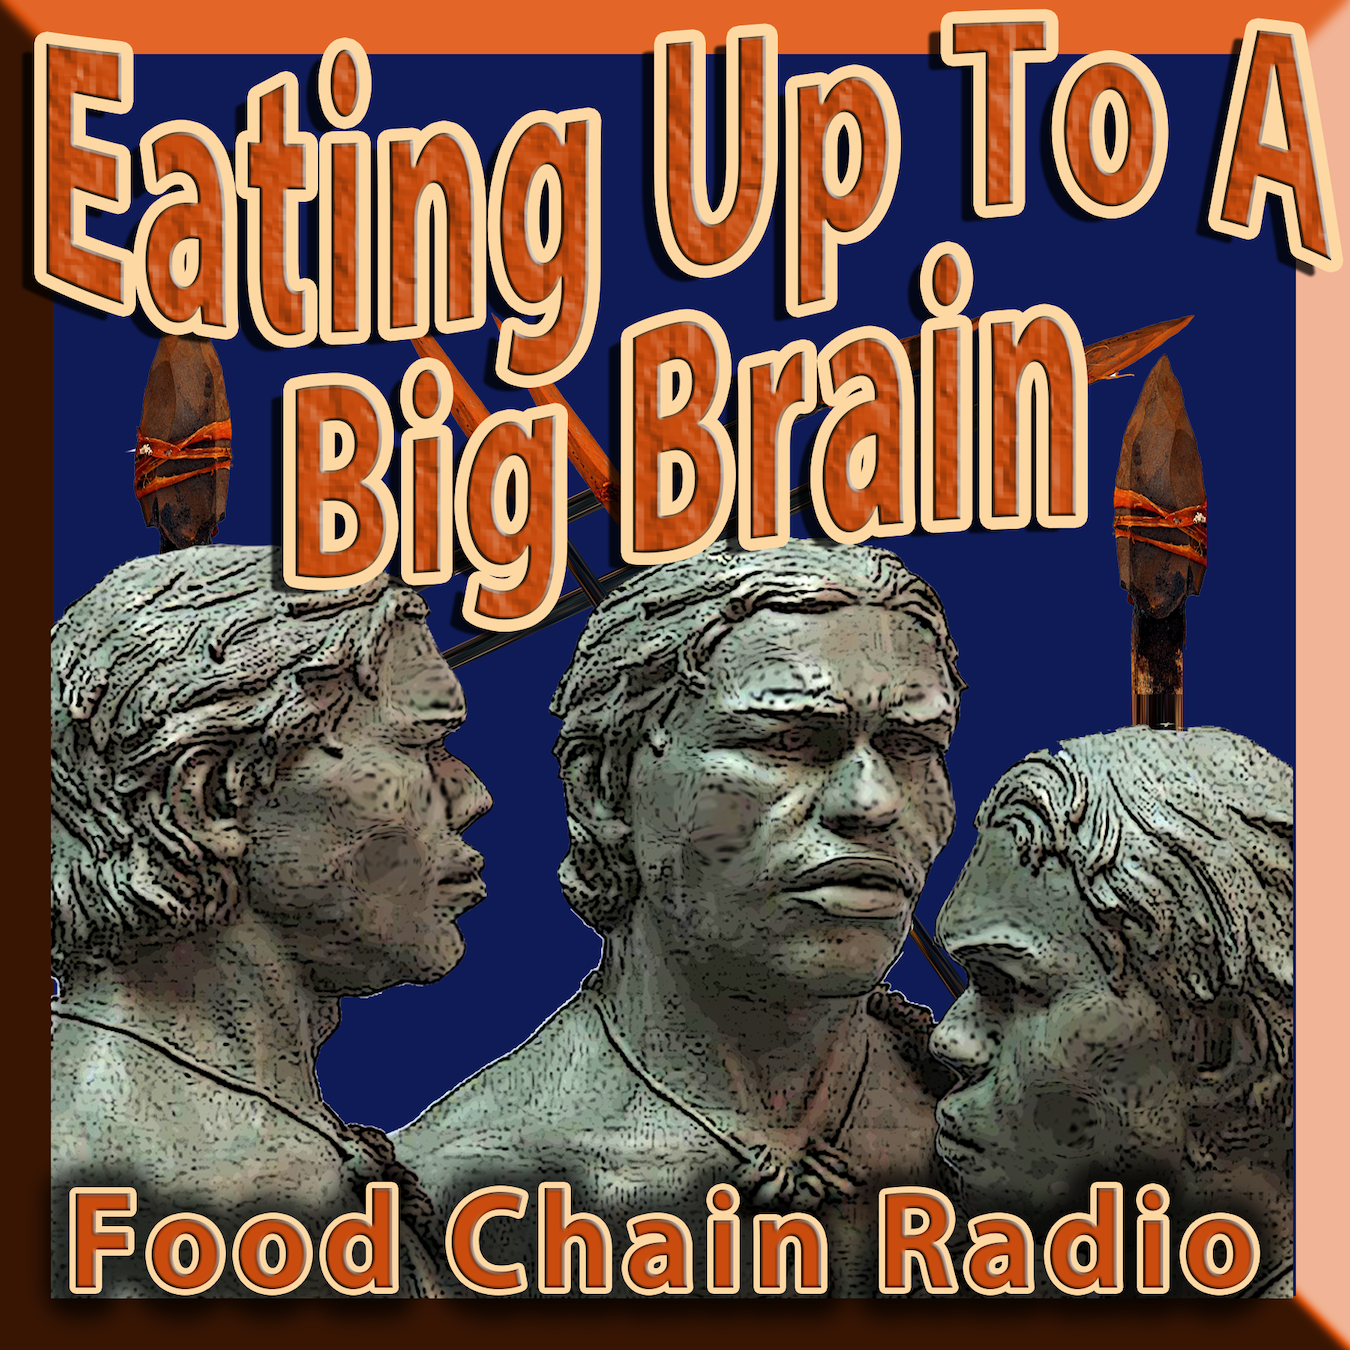 Michael Olson Food Chain Radio – Eating Up to a Big Brain! What did we eat back then that made us so smart today?